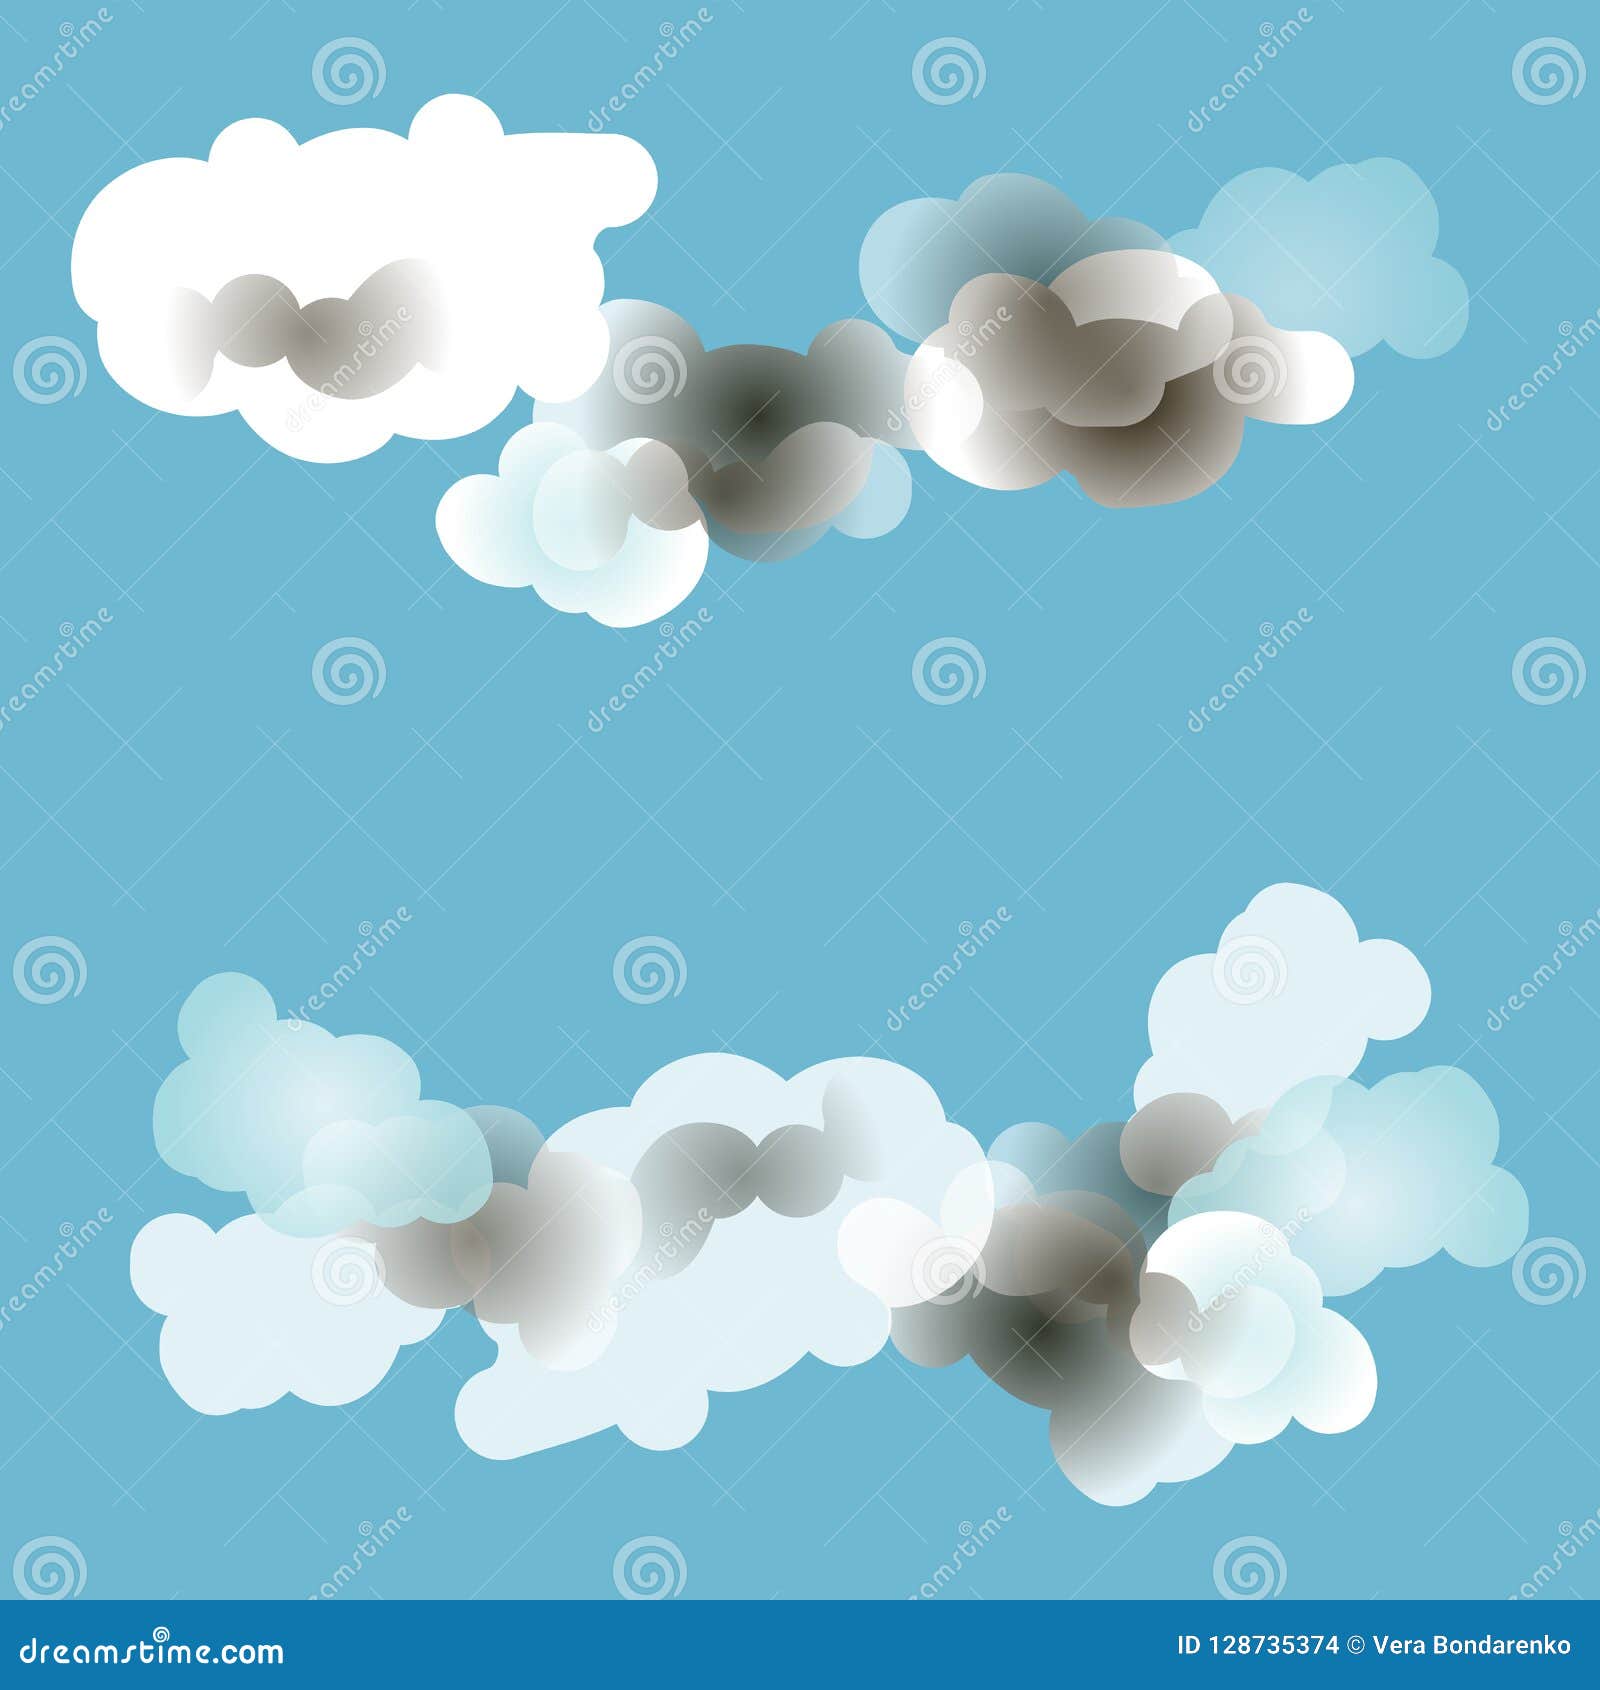 Blue Sky Background with Various Cartoon Clouds Stock Vector - Illustration  of concept, design: 128735374